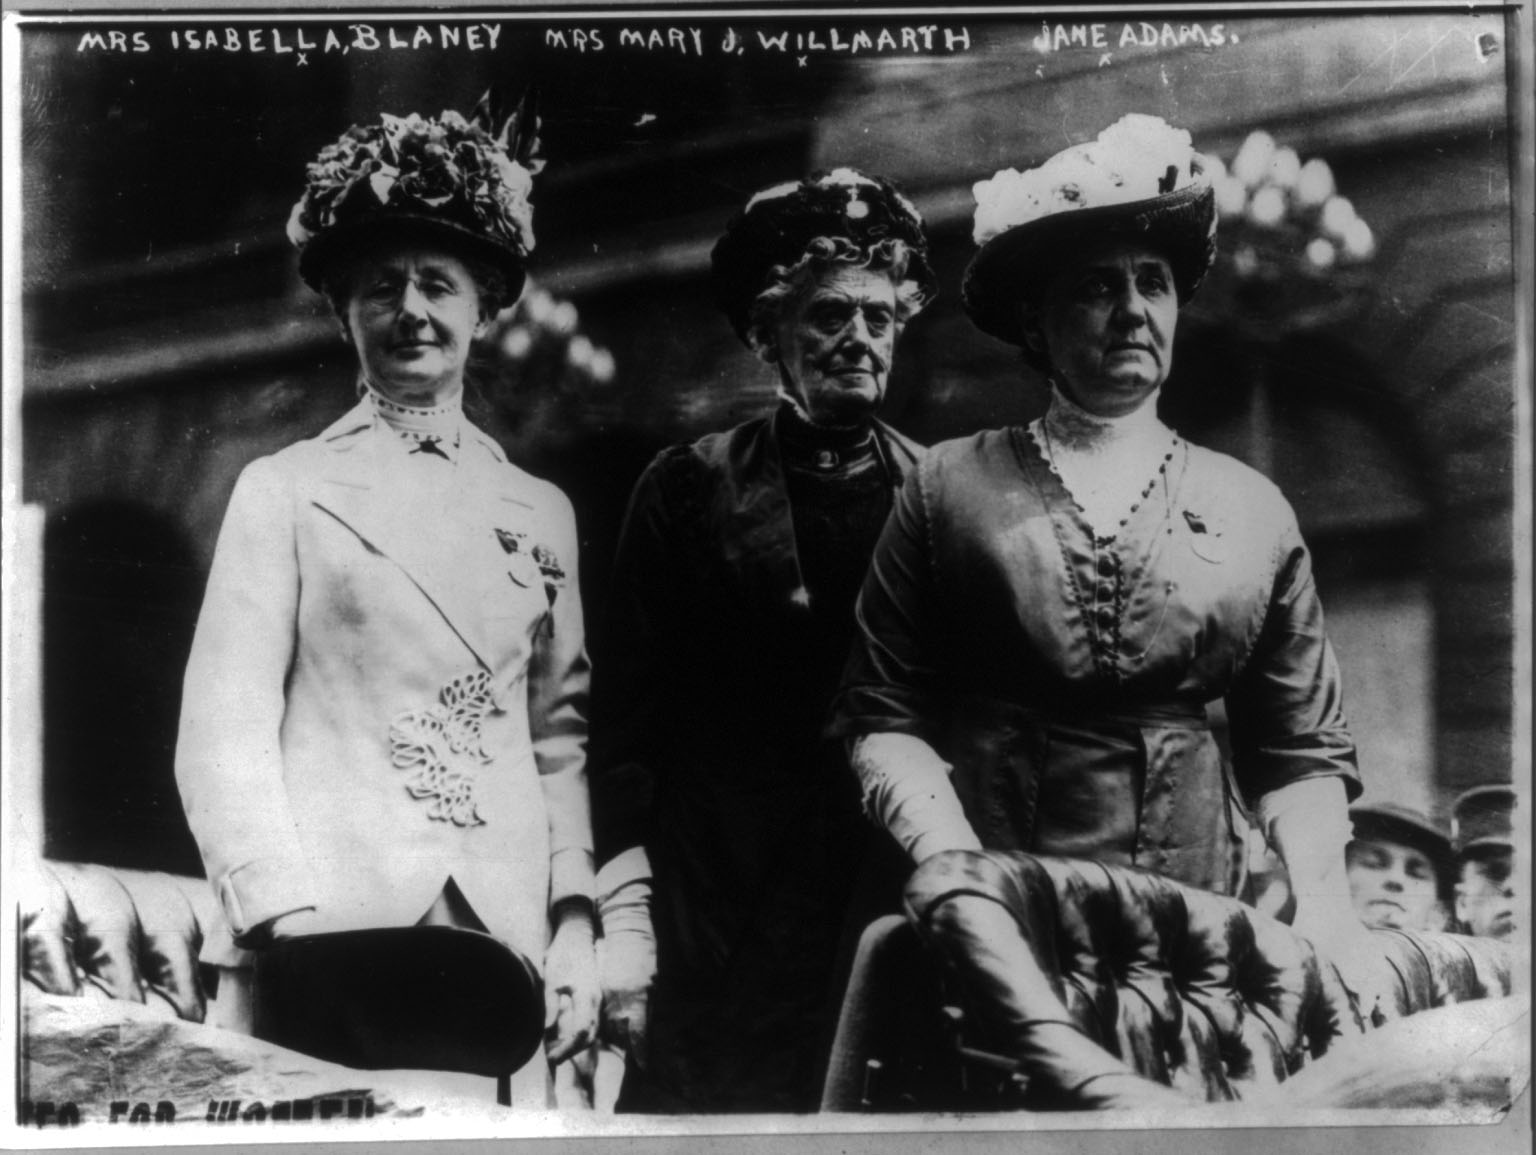 California Suffragettes - Isabella Blaney, Mary Willmarth, and Jane Addams